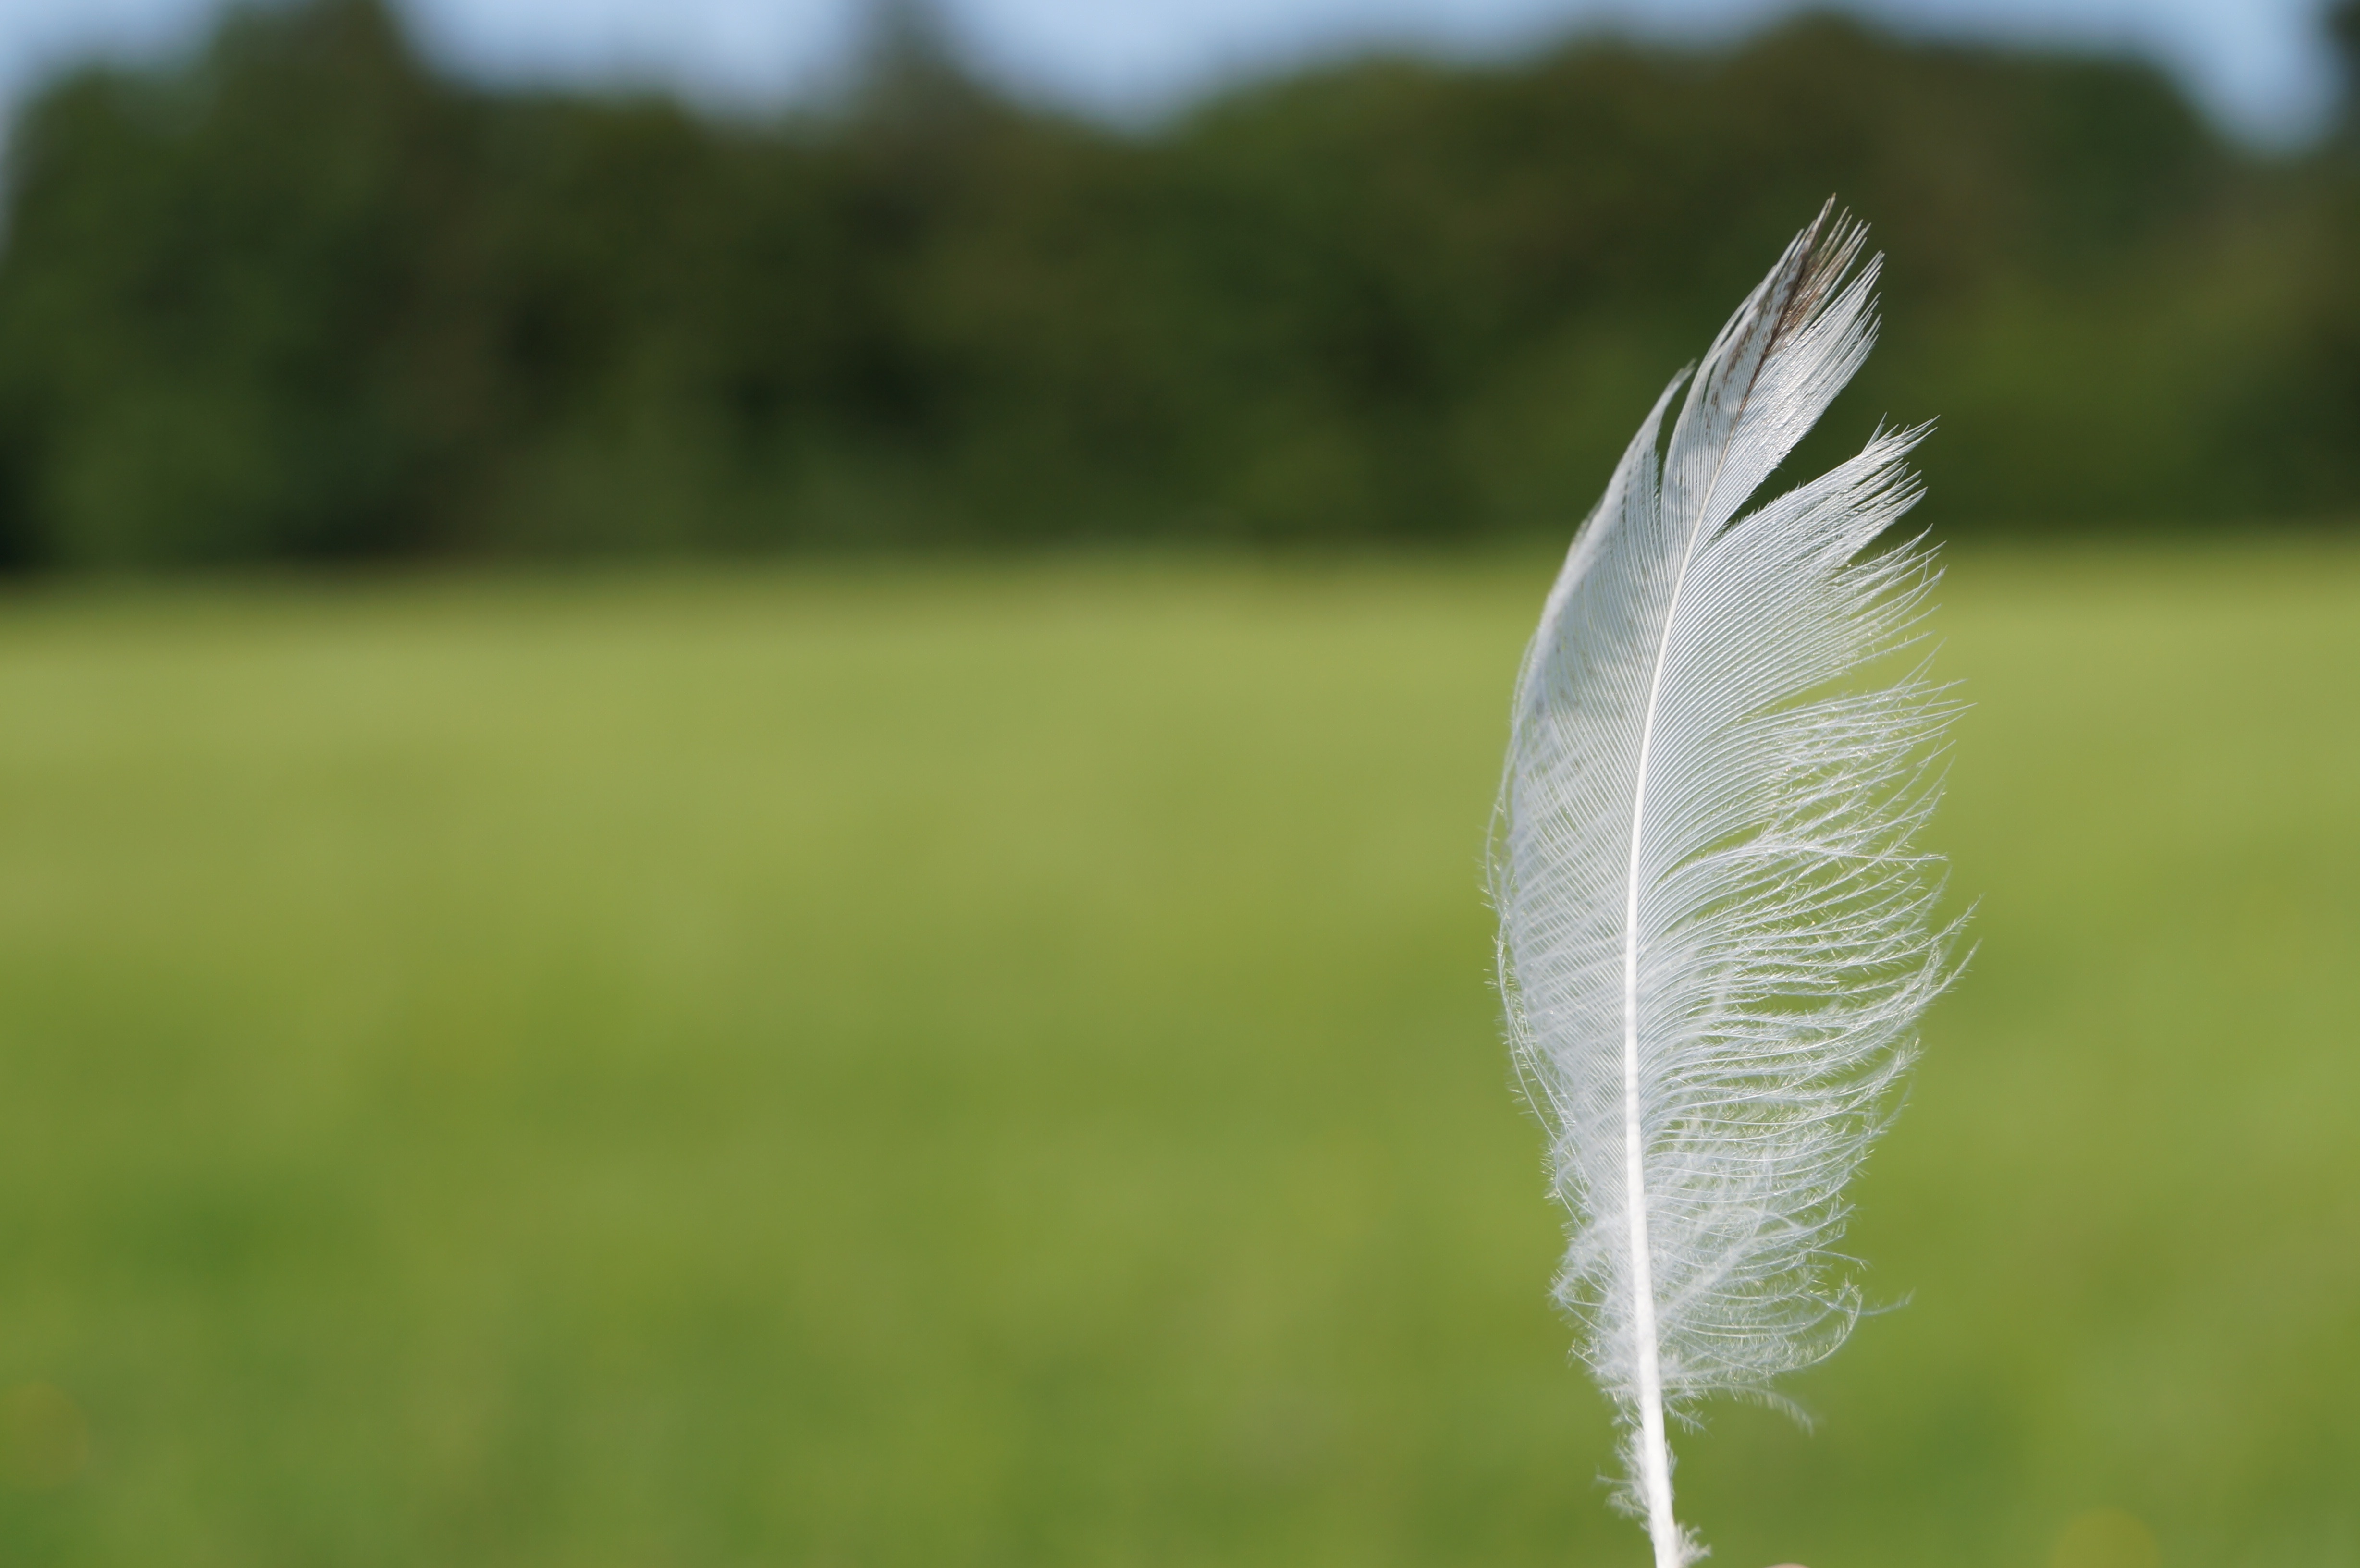 tilt shift photography of white feather  in front of green field during daytime